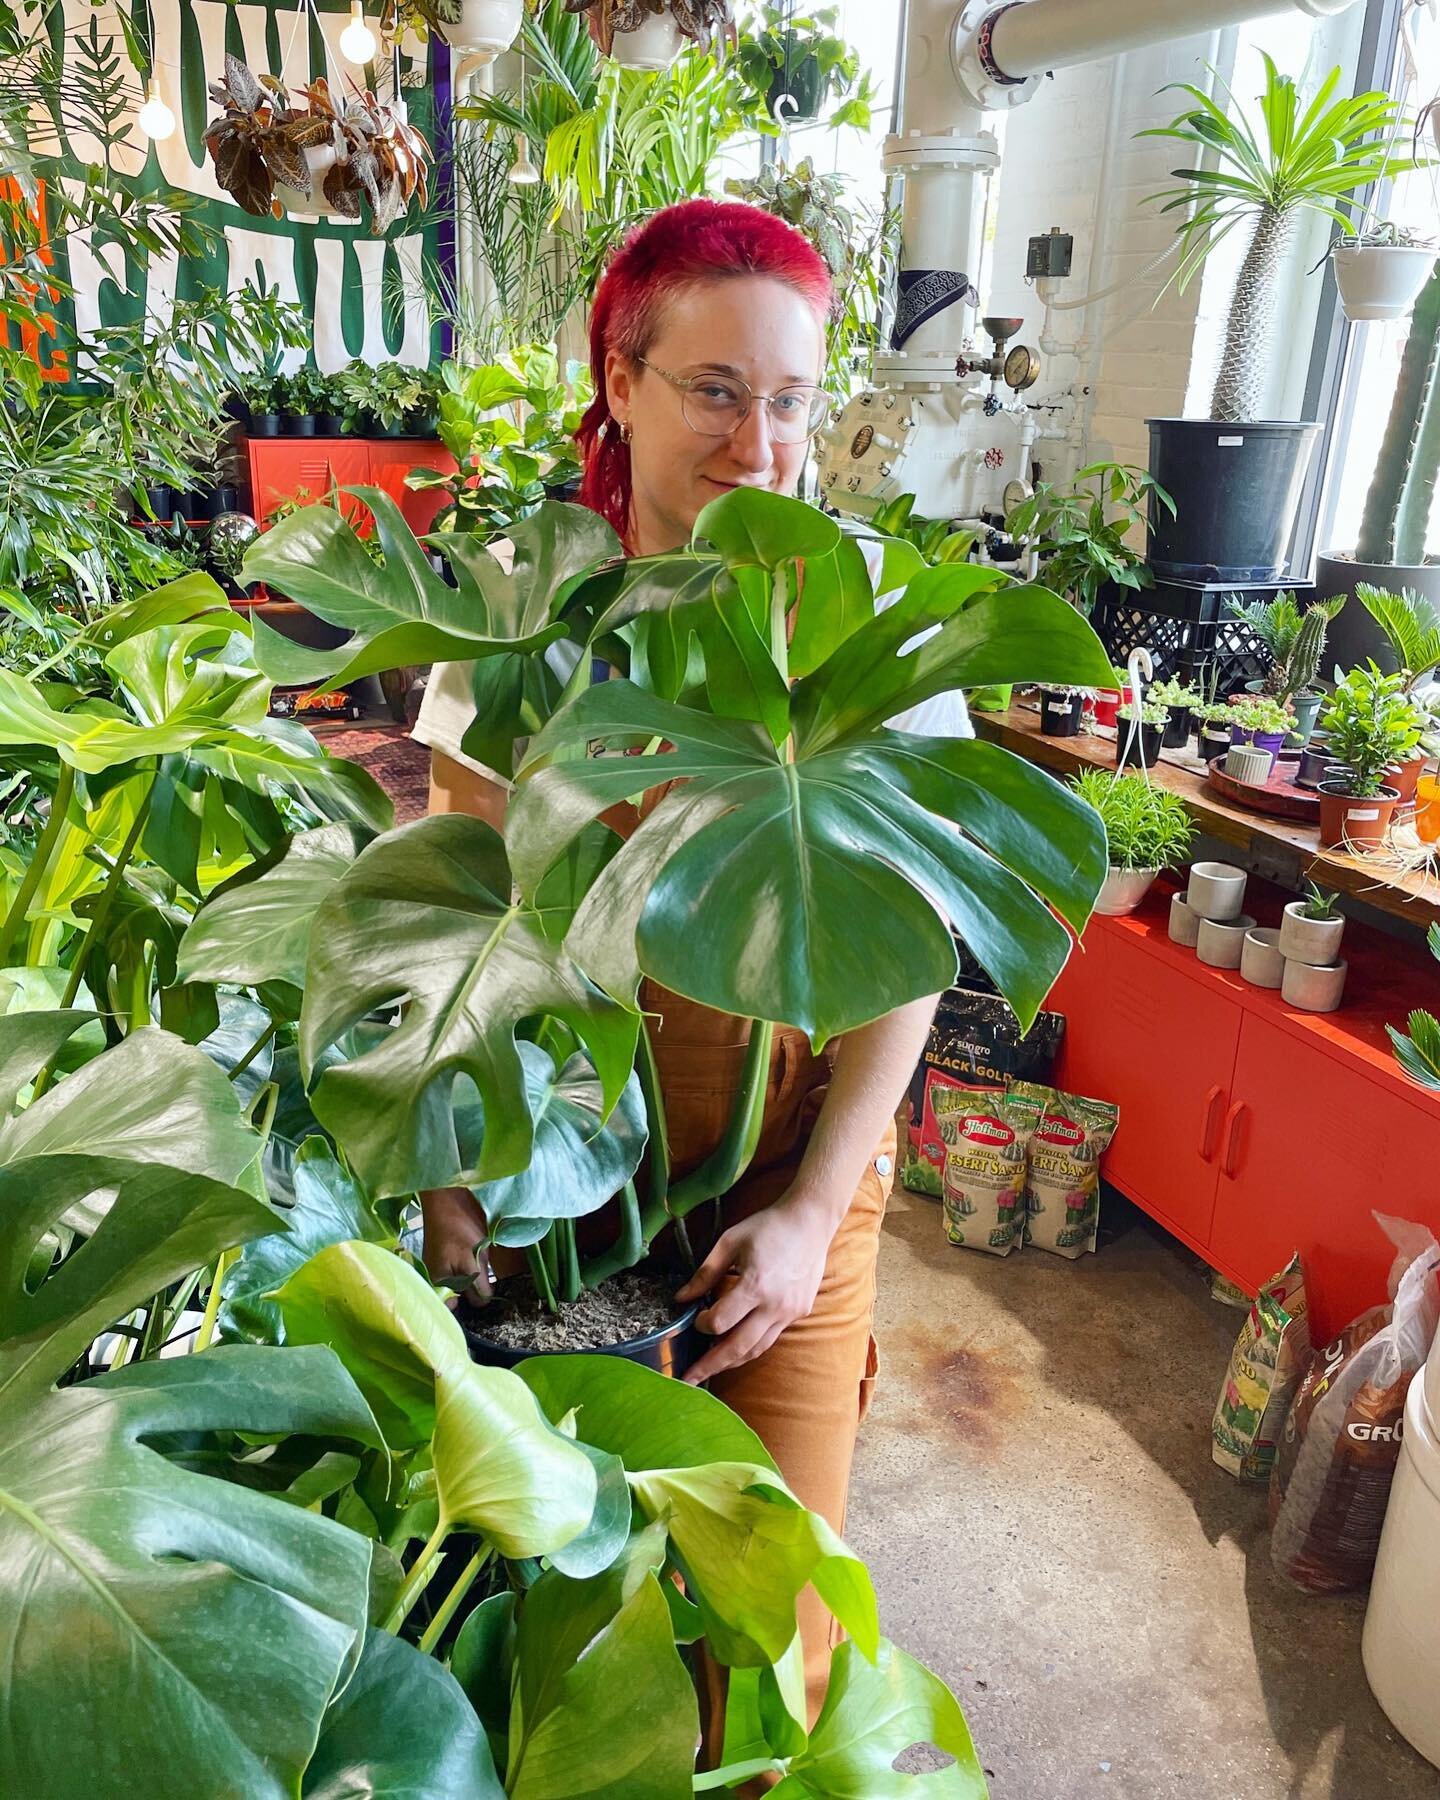 Making room for a bunch of larger leaves in the shop. 🌿🌿🌿 Monsteras are extra chunky this week! ☀️ Open at noon Saturday + Sunday. 
◆ ◆ ◆  D ❖ P ◆ ◆ ◆
#monstera #monsteradeliciosa 
.
.
.
.
.
.
#daddysplants #plantshop #buffalony #1250niagara #uppe